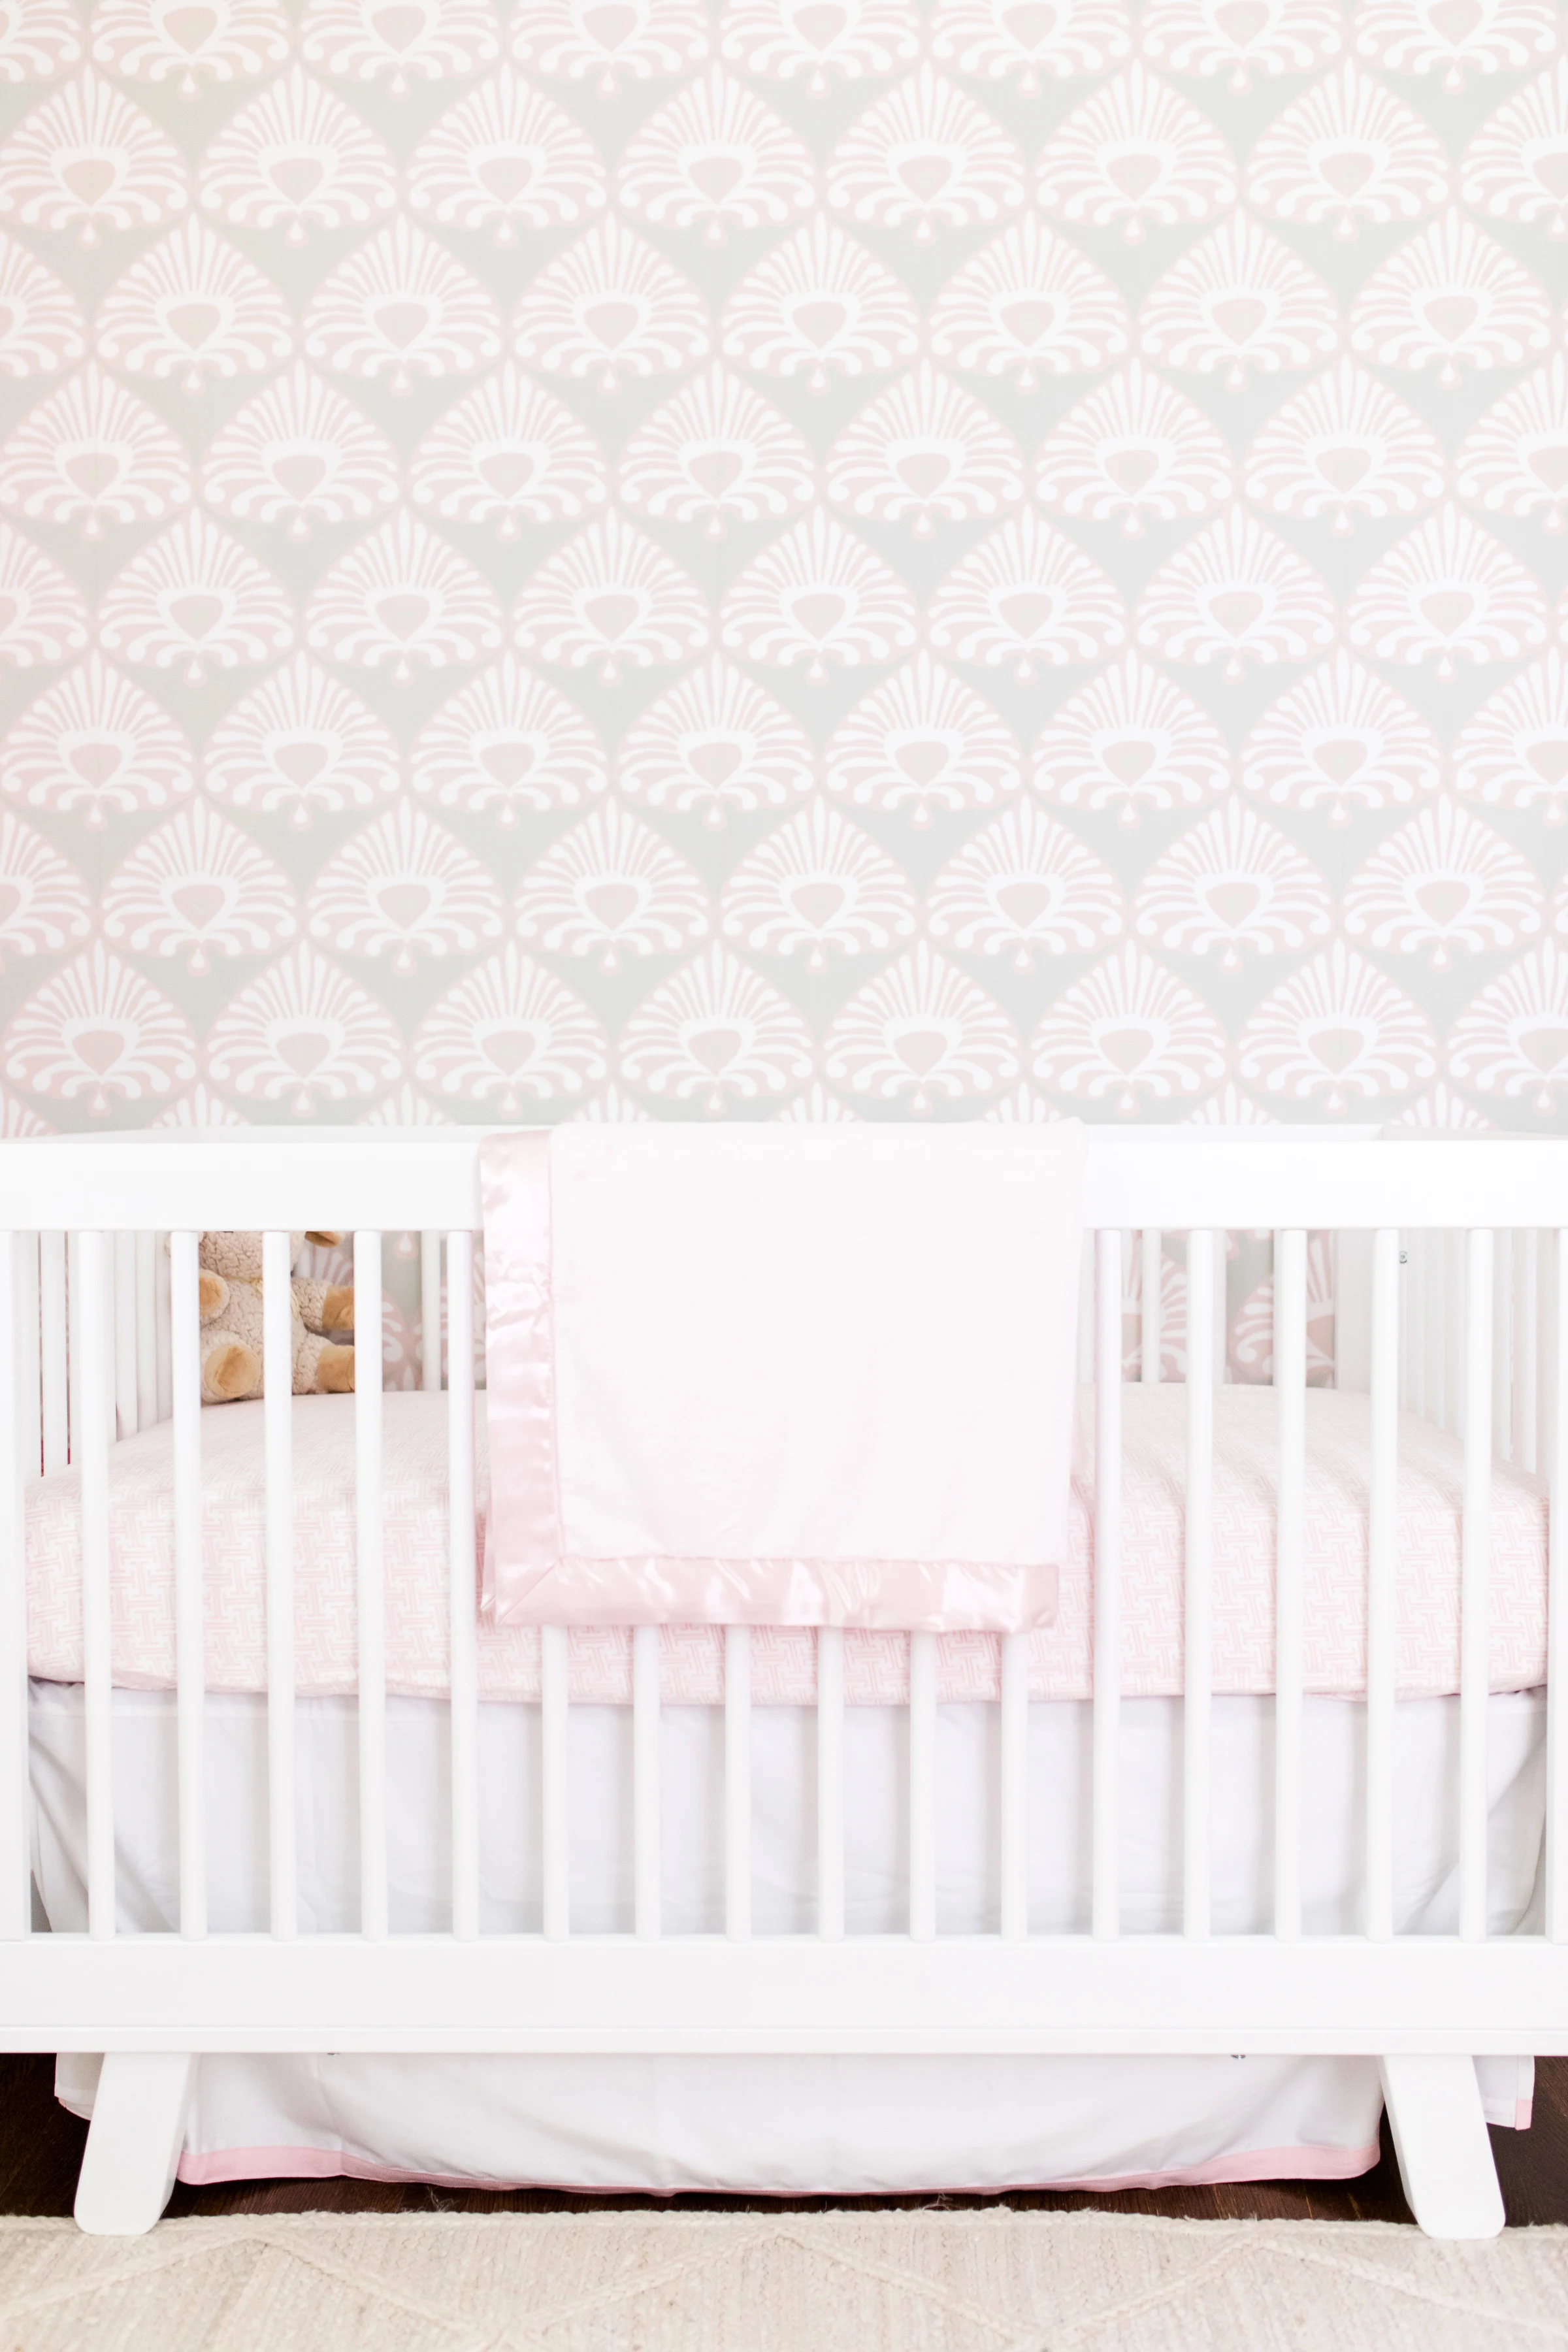 Pink and Gray Nursery Wallpaper with White Crib - Project Nursery